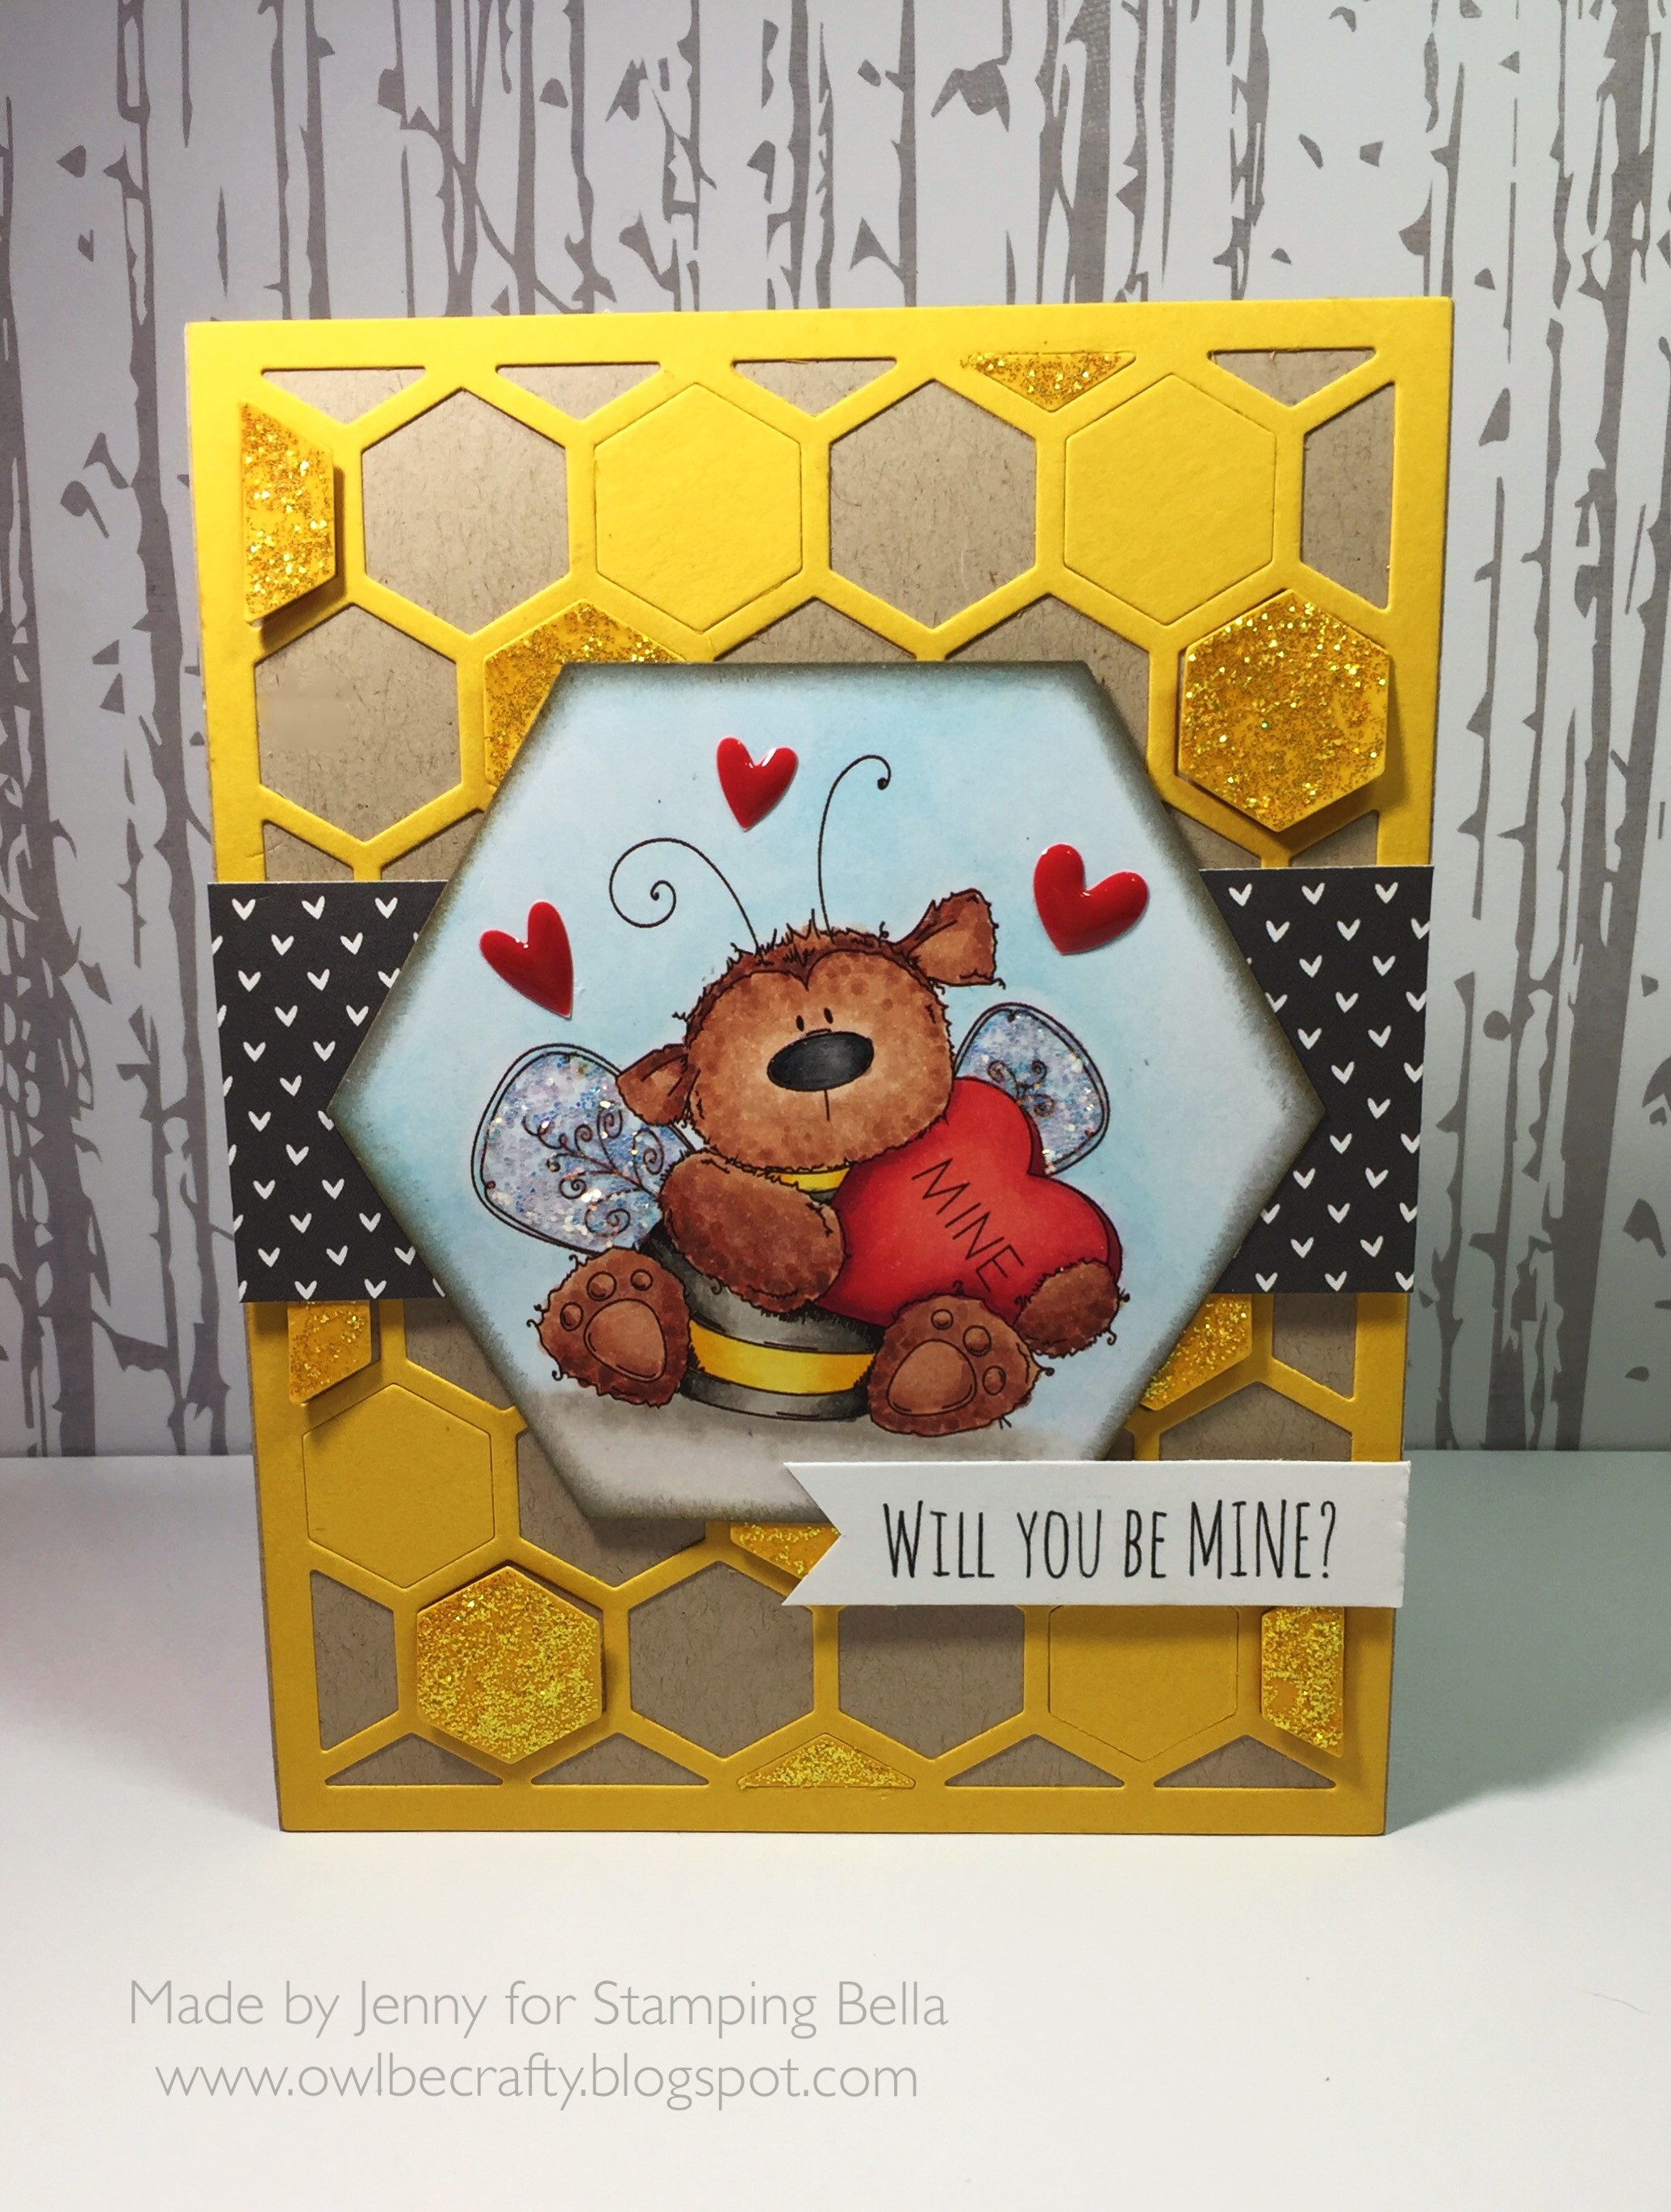 Stamping Bella JANUARY 2017 rubber stamp release- BEE MINE card by Jenny Bordeaux